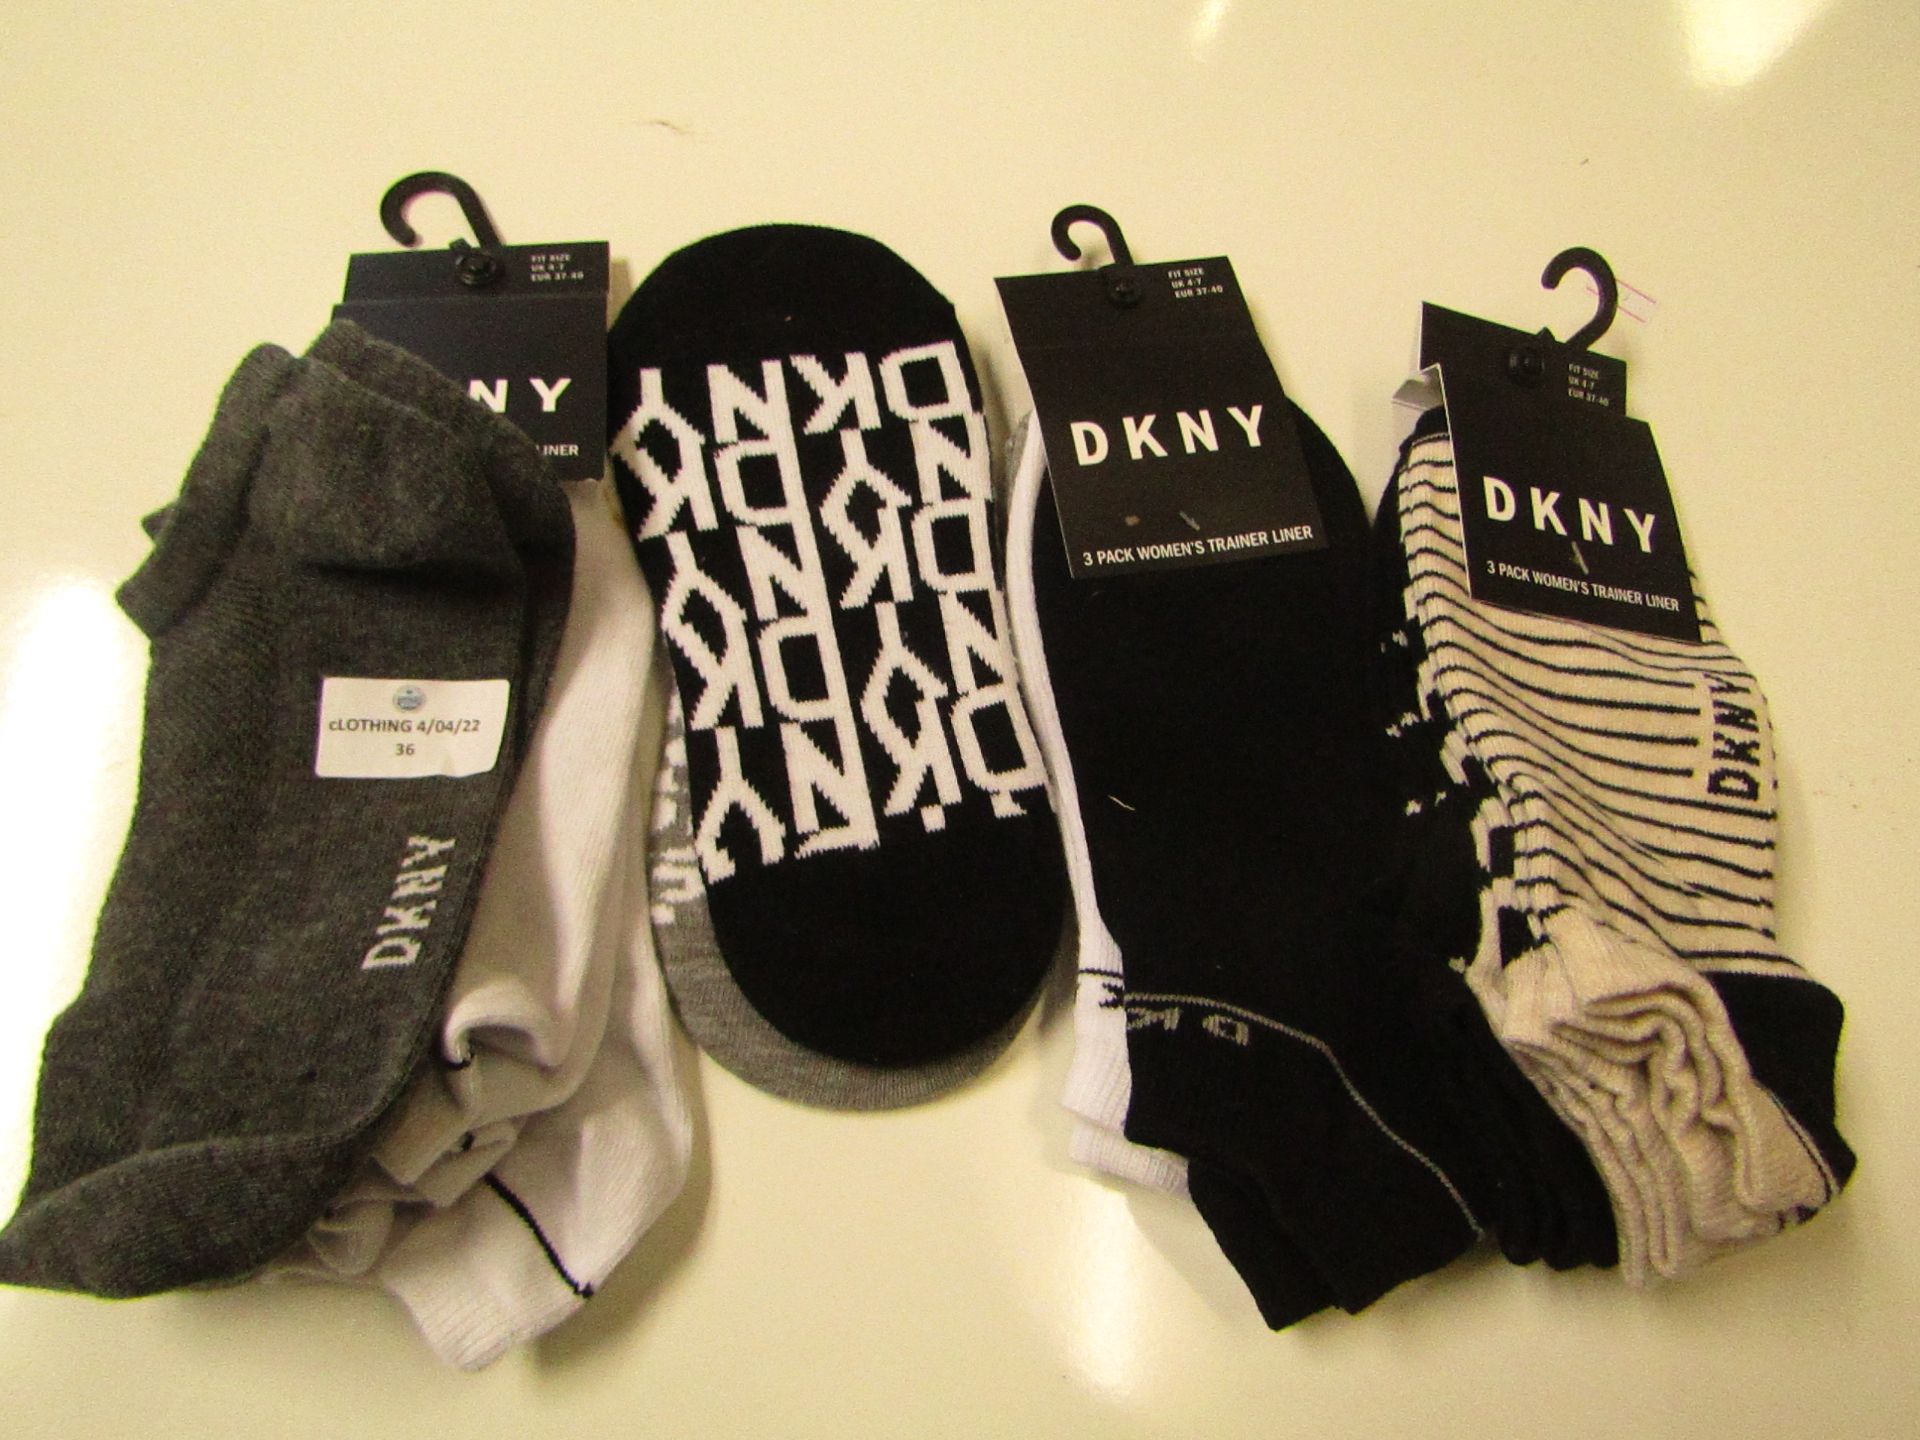 9 X Pairs of DKNY Ladies Trainer Socks & 2 X Pairs of Ladies Shoe Liners All Size 4-7 Only Packaging